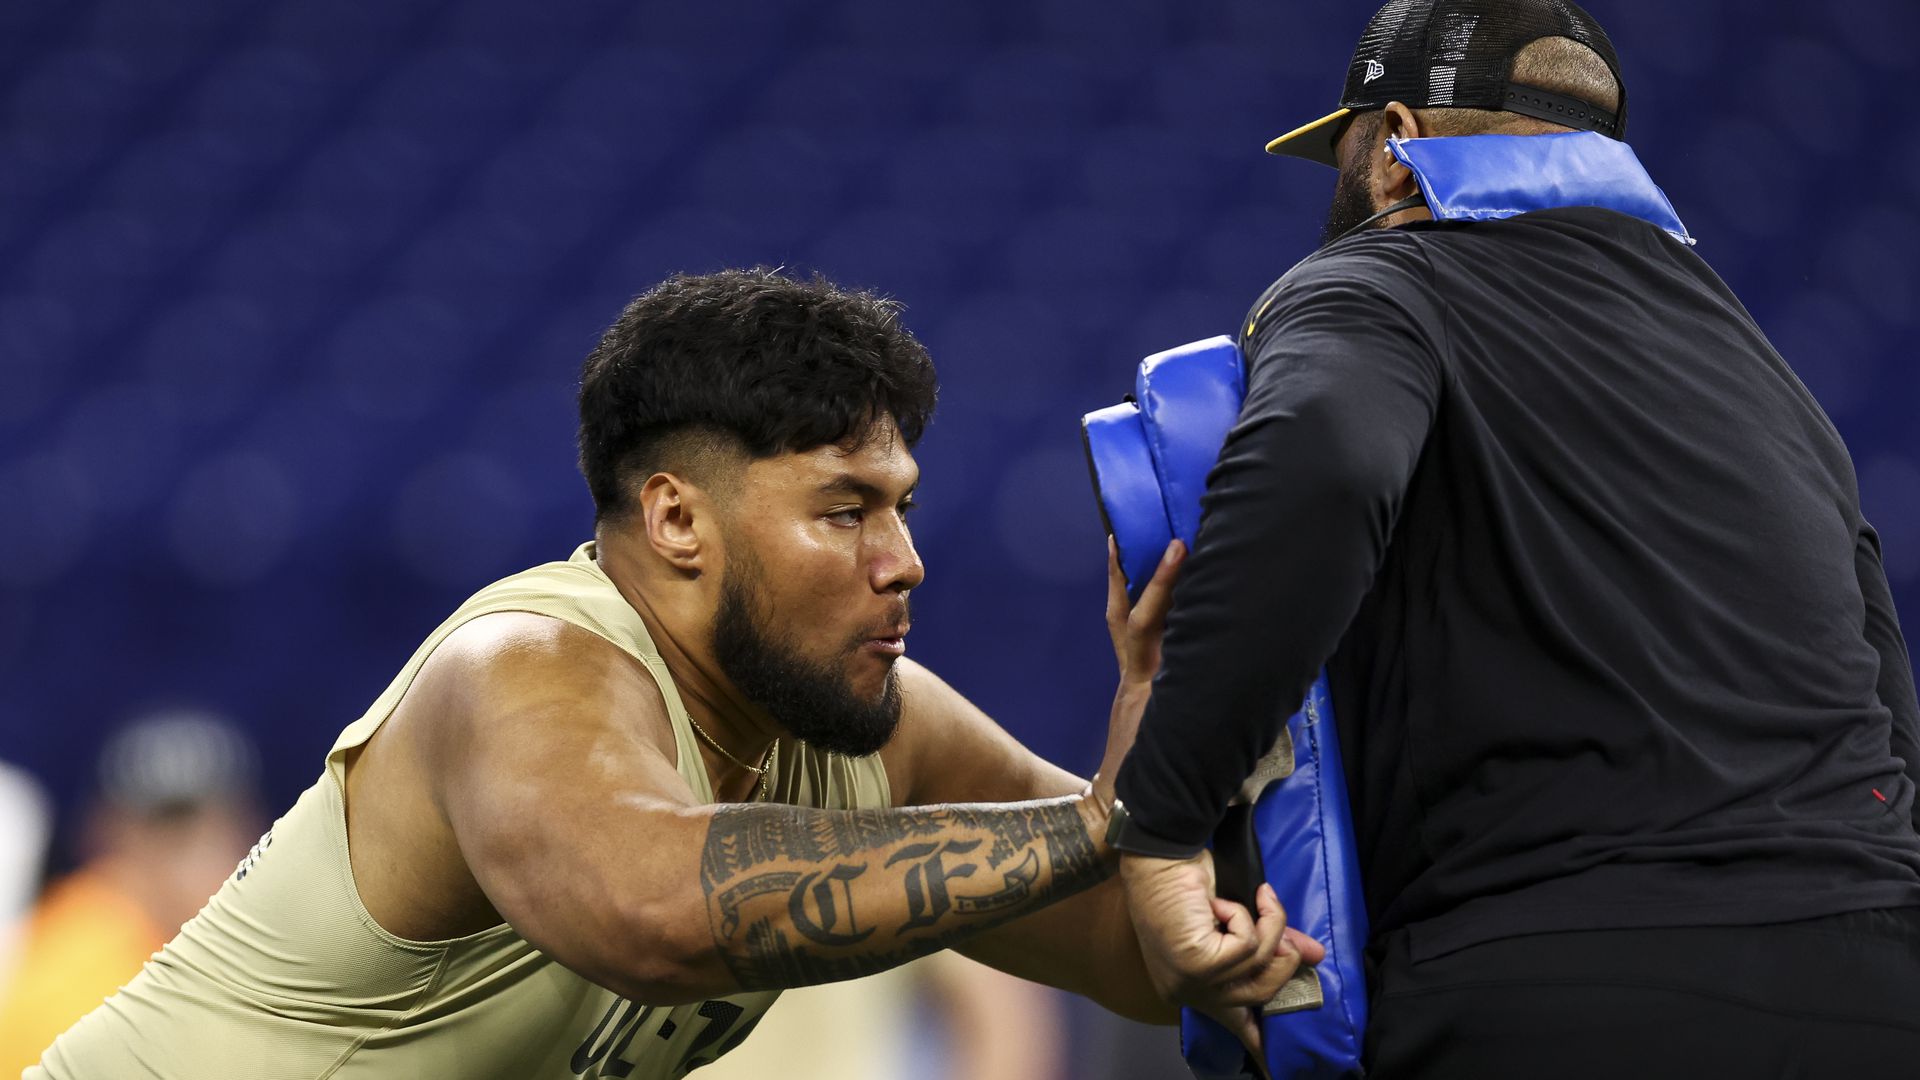 steelers ot troy fautanu used mostly as rt on day one of rookie minicamp